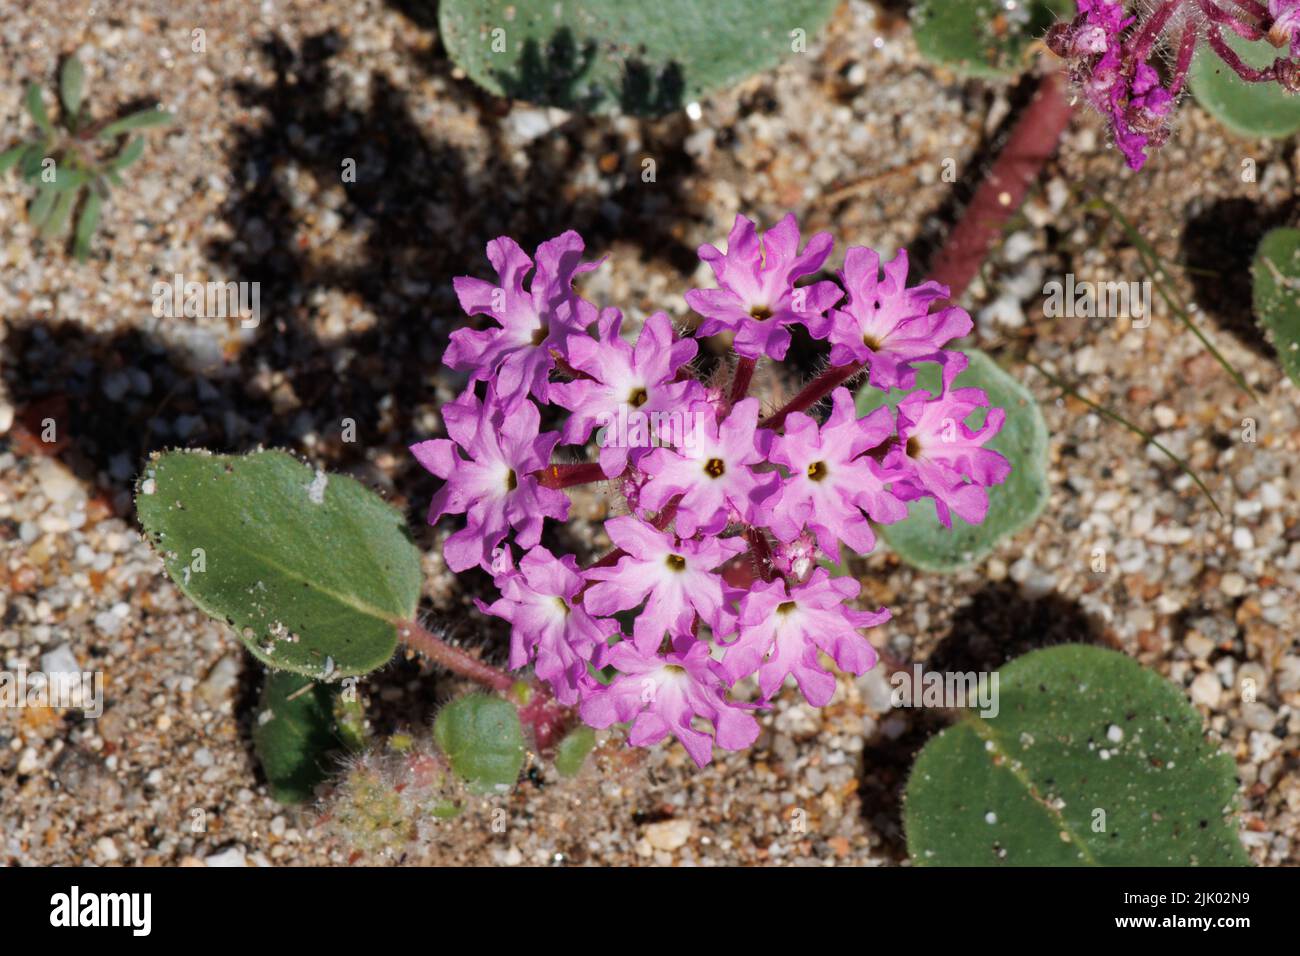 Pink flowering racemose capitate cluster inflorescence of Abronia Villosa, Nyctaginaceae, native annual in the Anza Borrego Desert, Springtime. Stock Photo